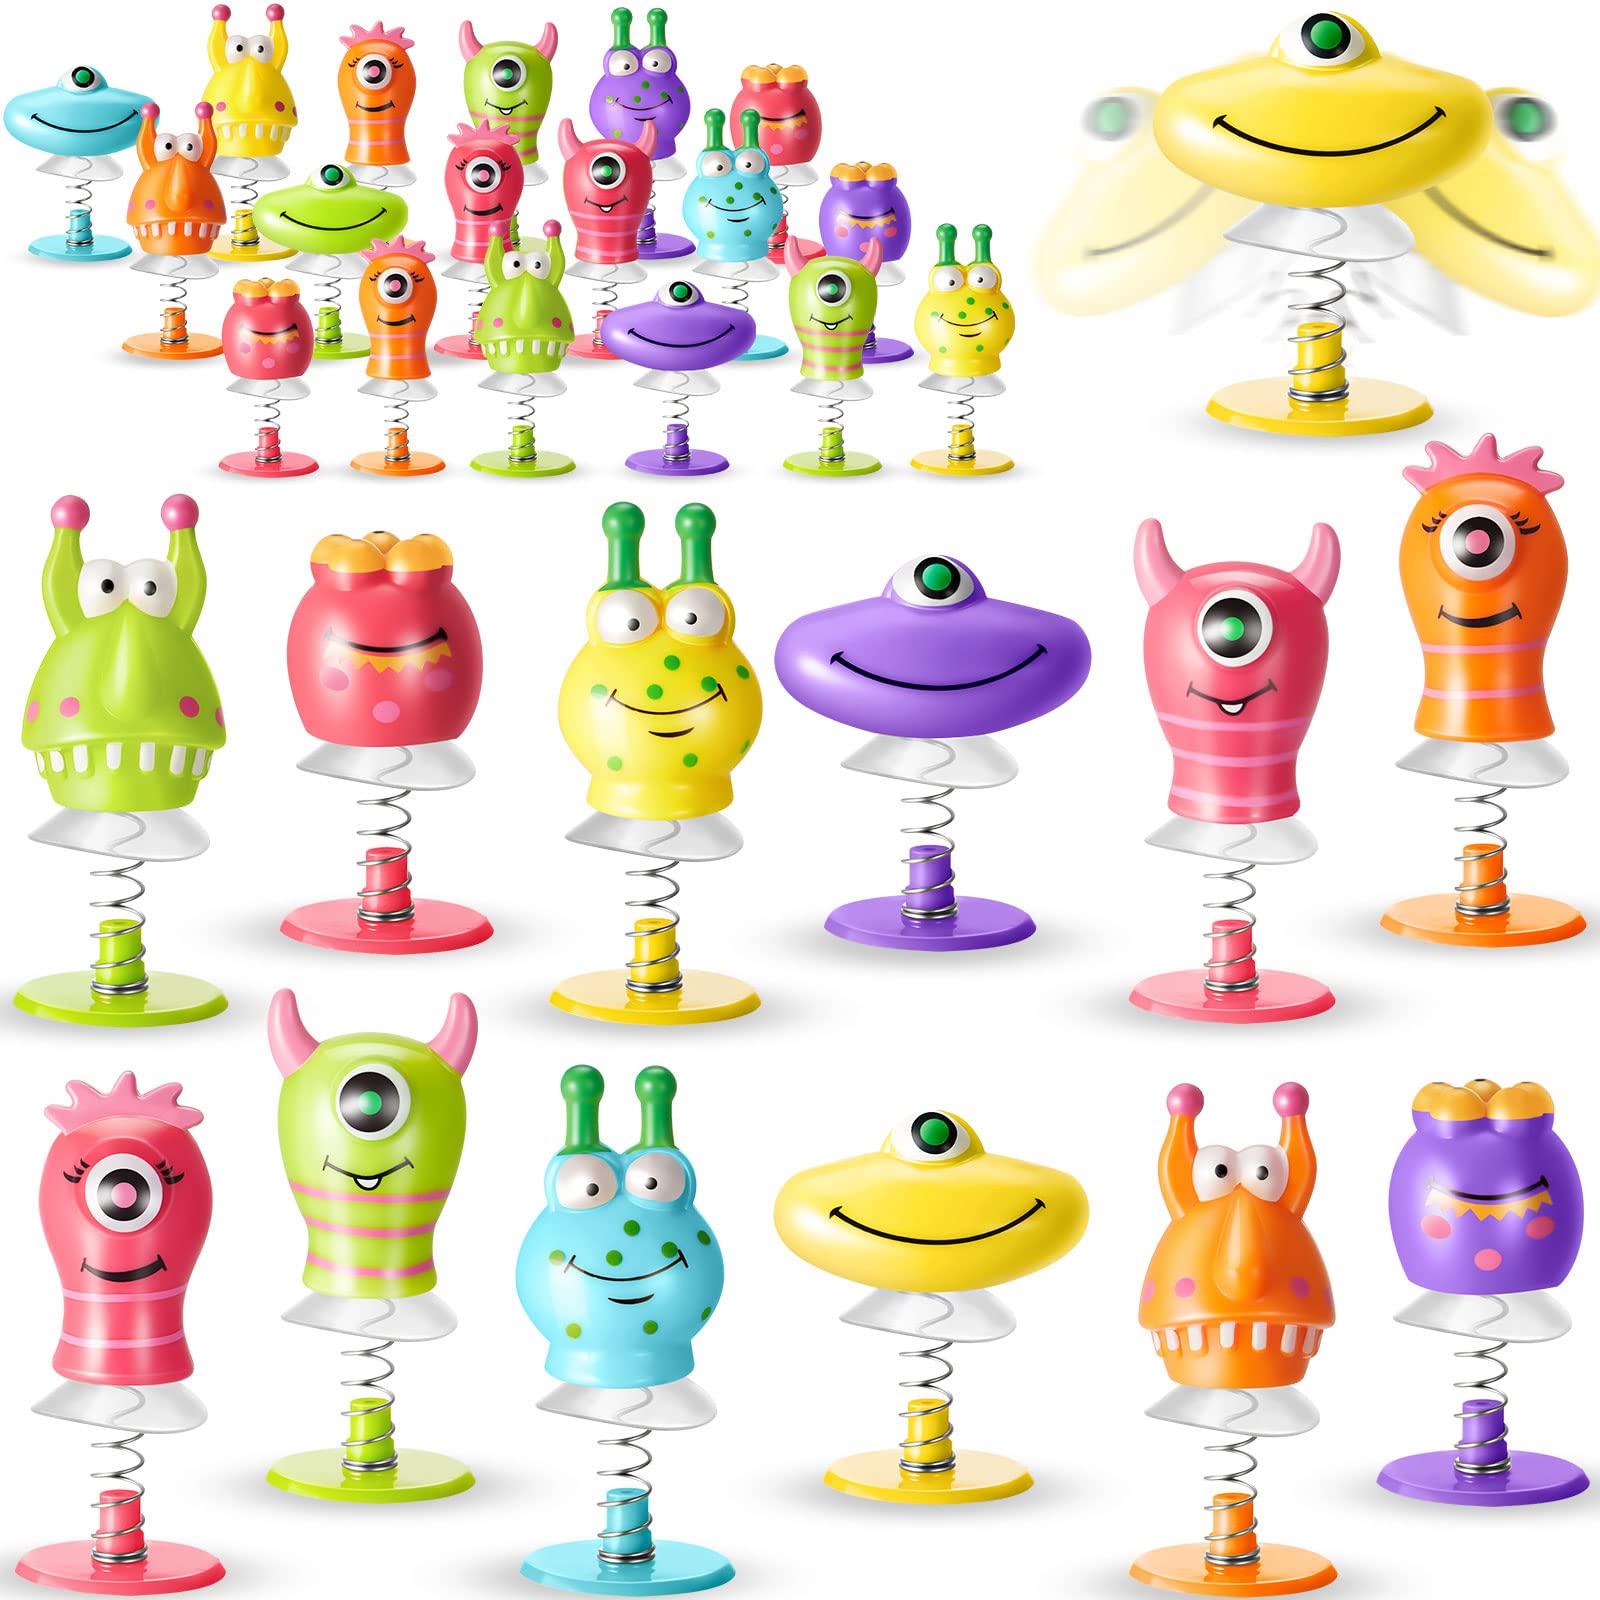 DEEKIN Big Eye Animal Toys Spring Launchers Toys Jumping Toys Bouncy Party Favors for Boys and Girls Classroom Prizes Return Gifts Goodie Bag Fillers, 6 Styles (60 Pieces)